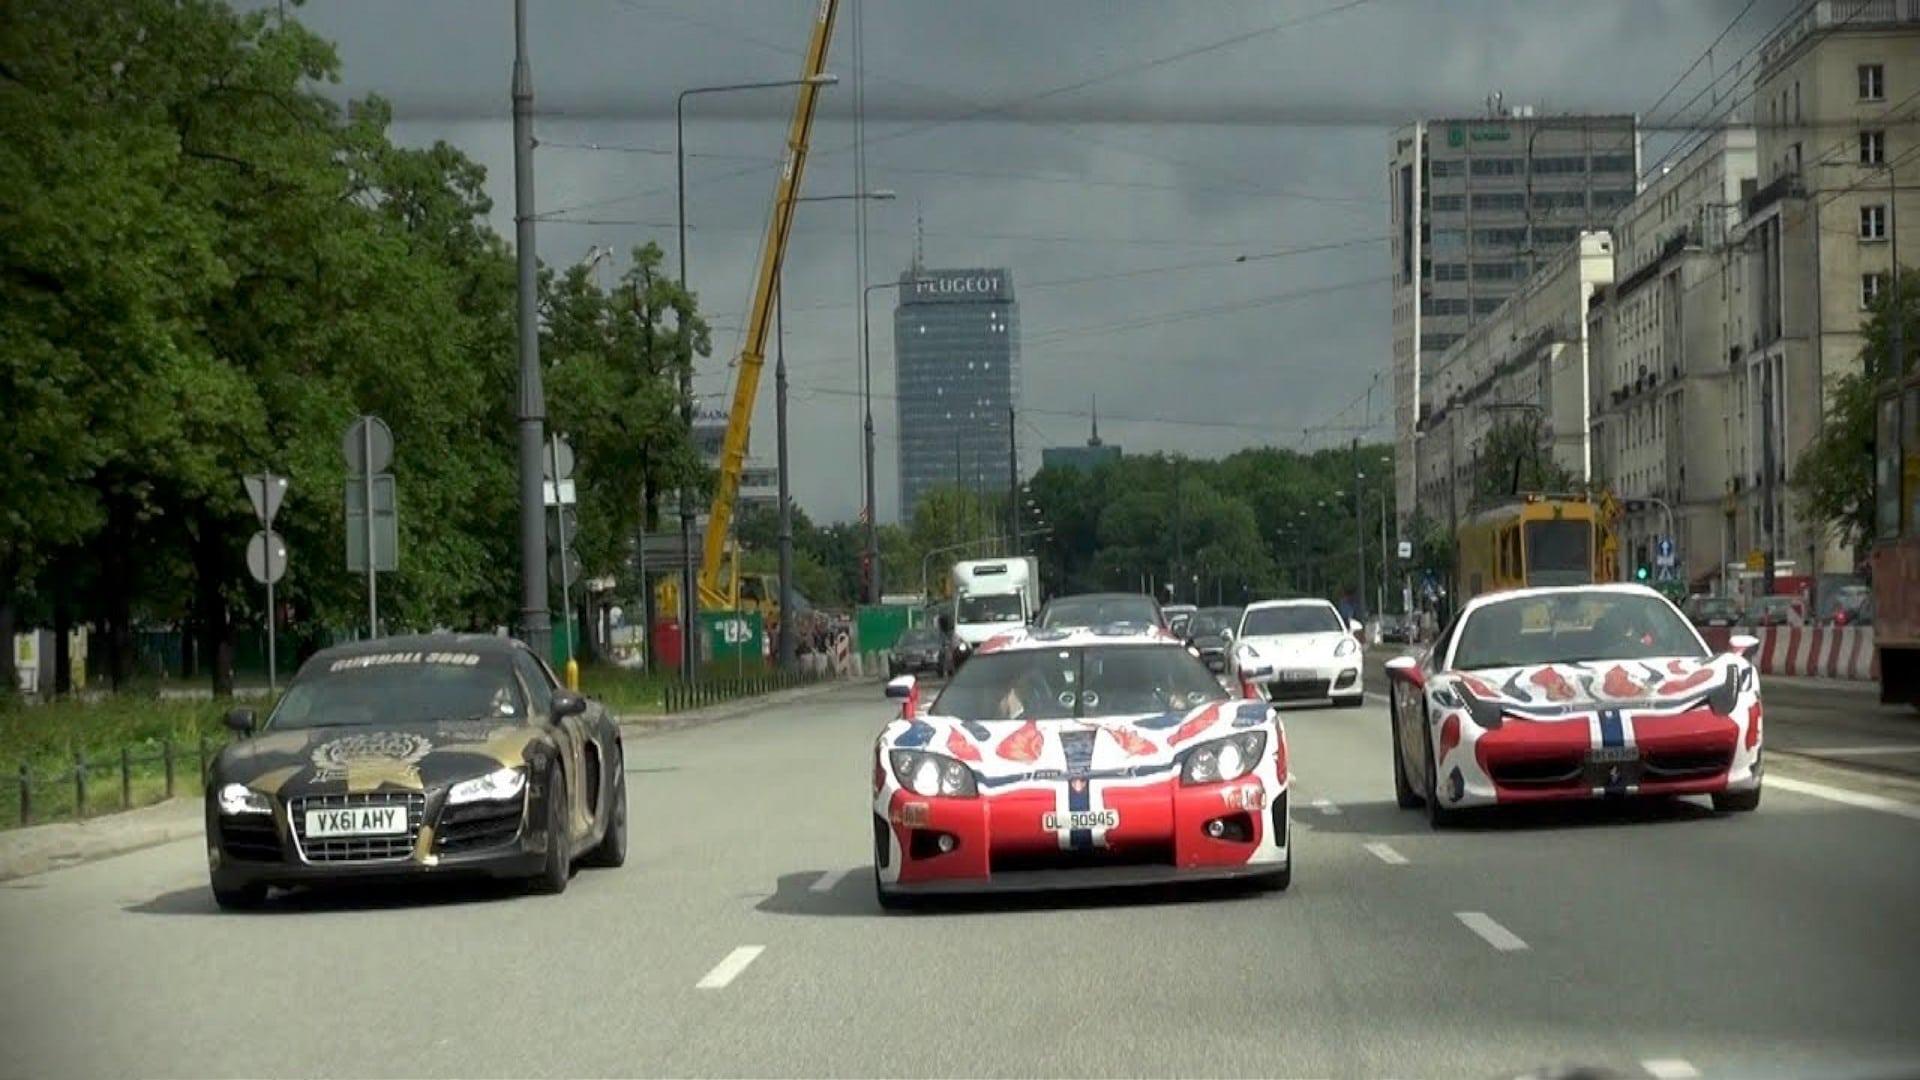 Gumball 3000: The Movie backdrop